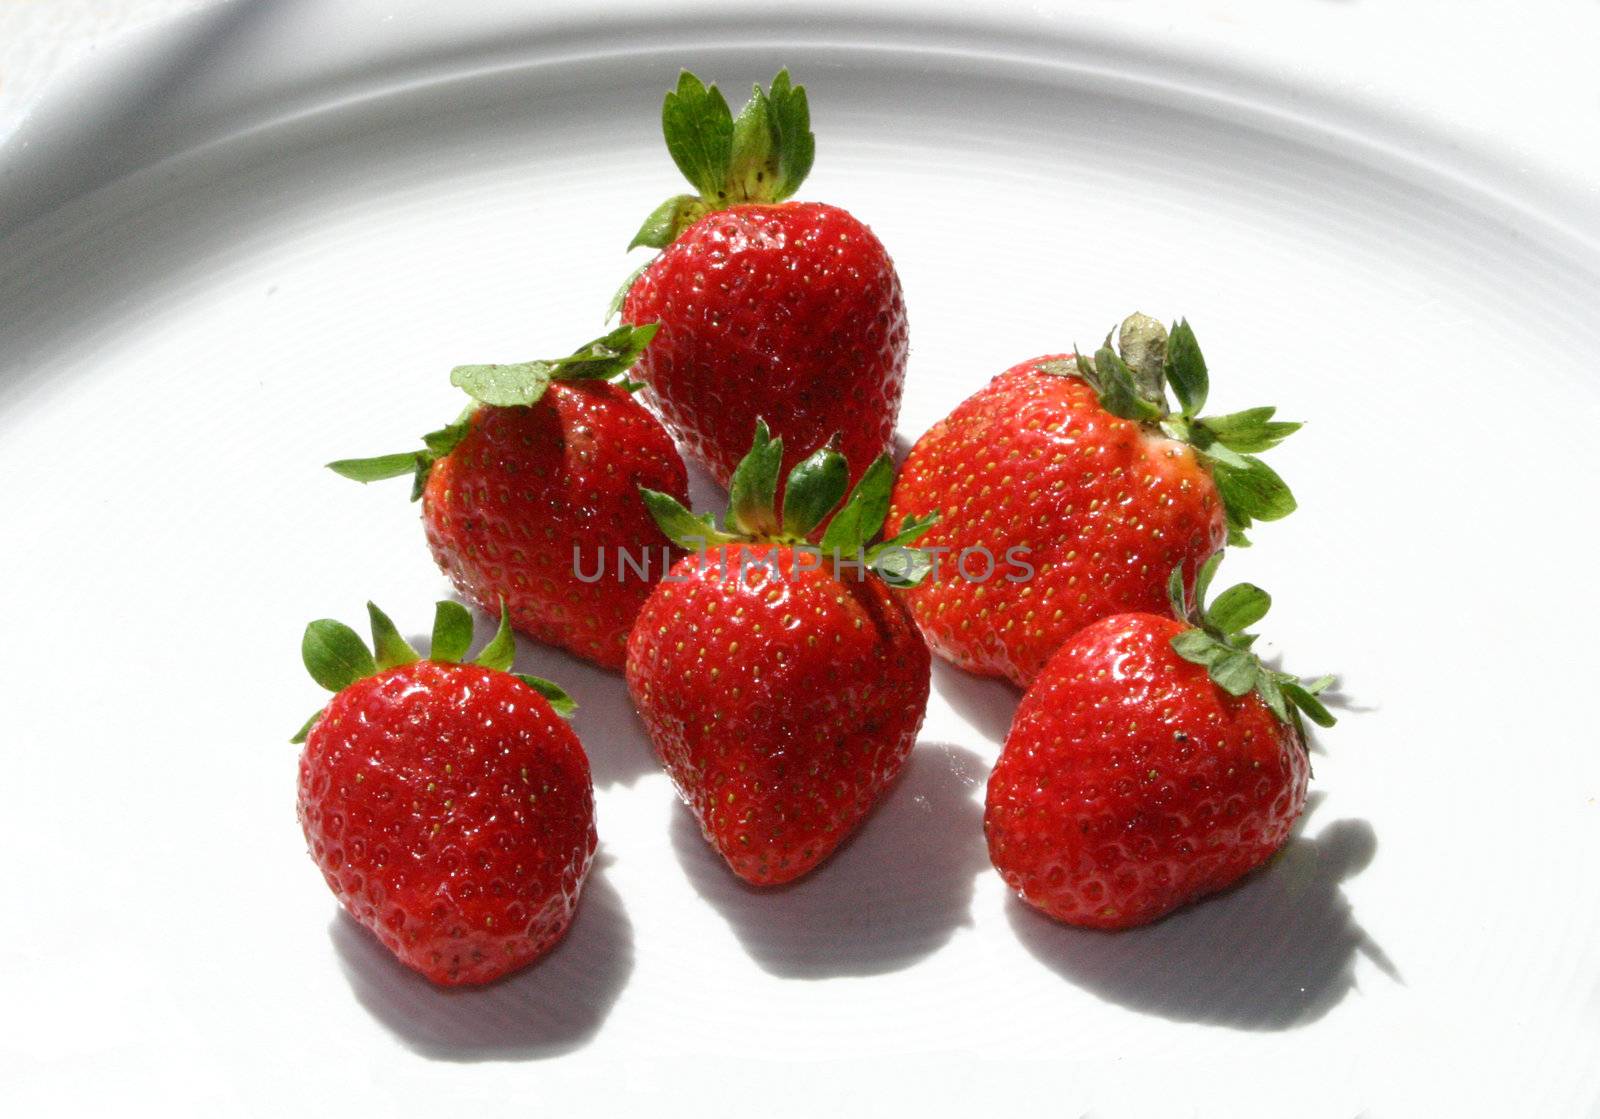 Strawberries on white dish by ommo